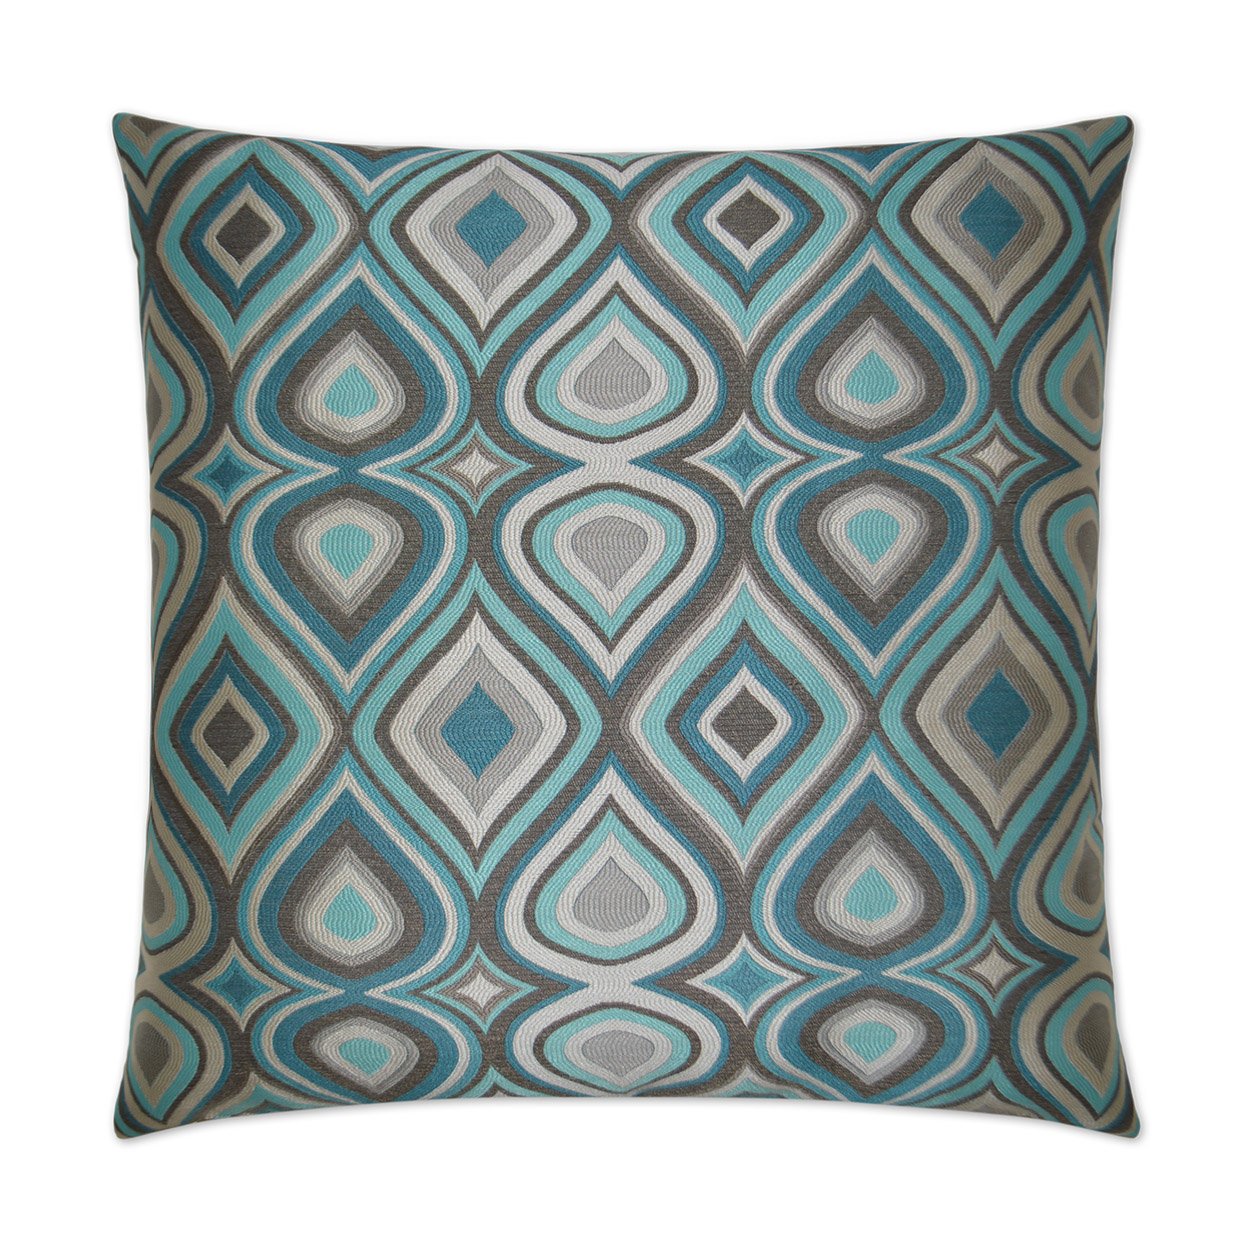 Luxury Lumbar Pillow - 24" x 14" - Doyle; Teals, taupe silvers in an elegant shimmering design